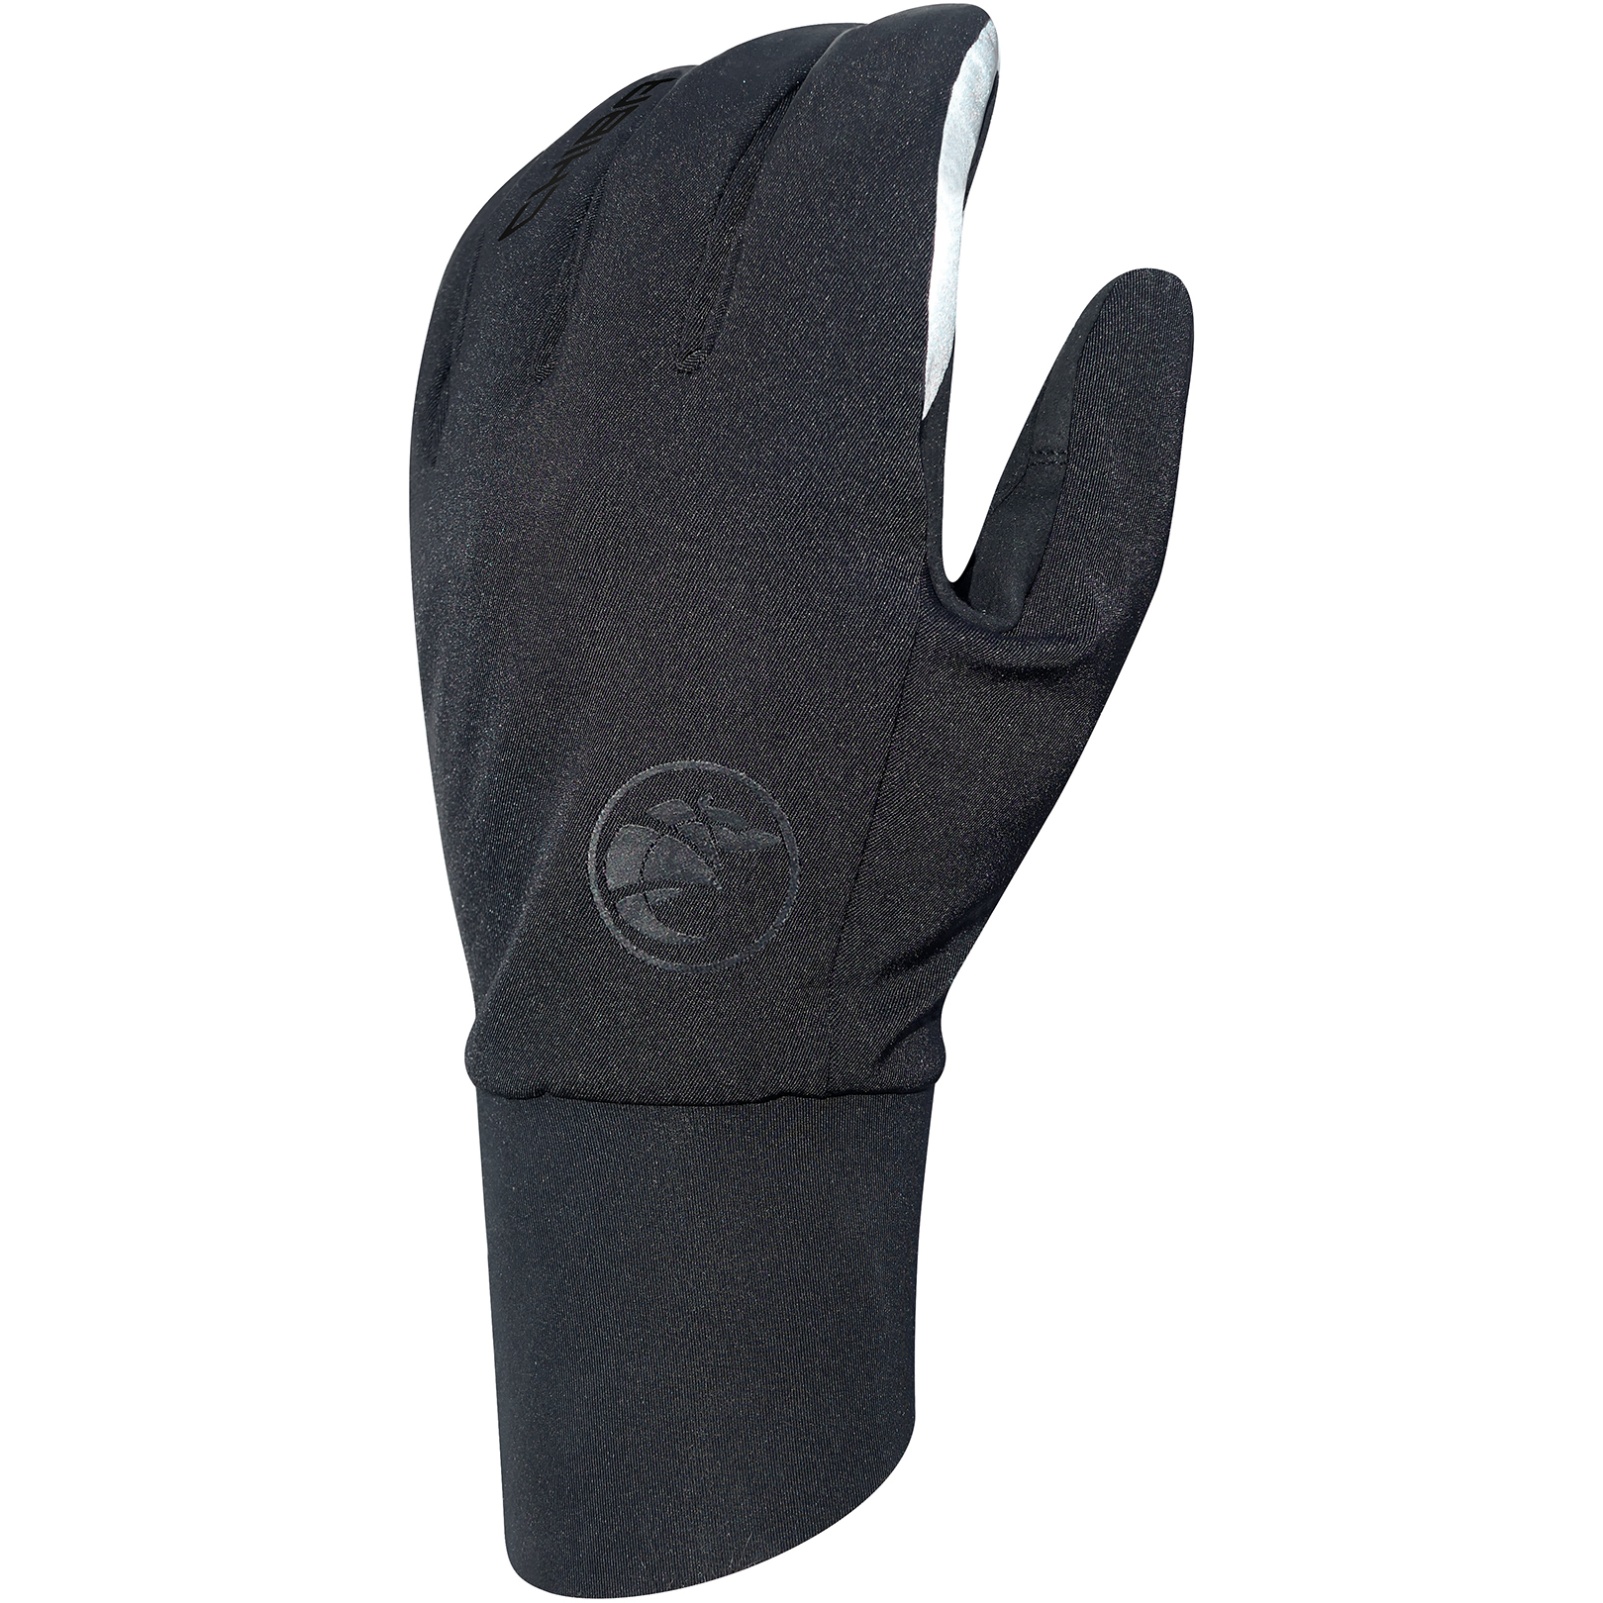 Image of Chiba Commuter Cycling Gloves - black